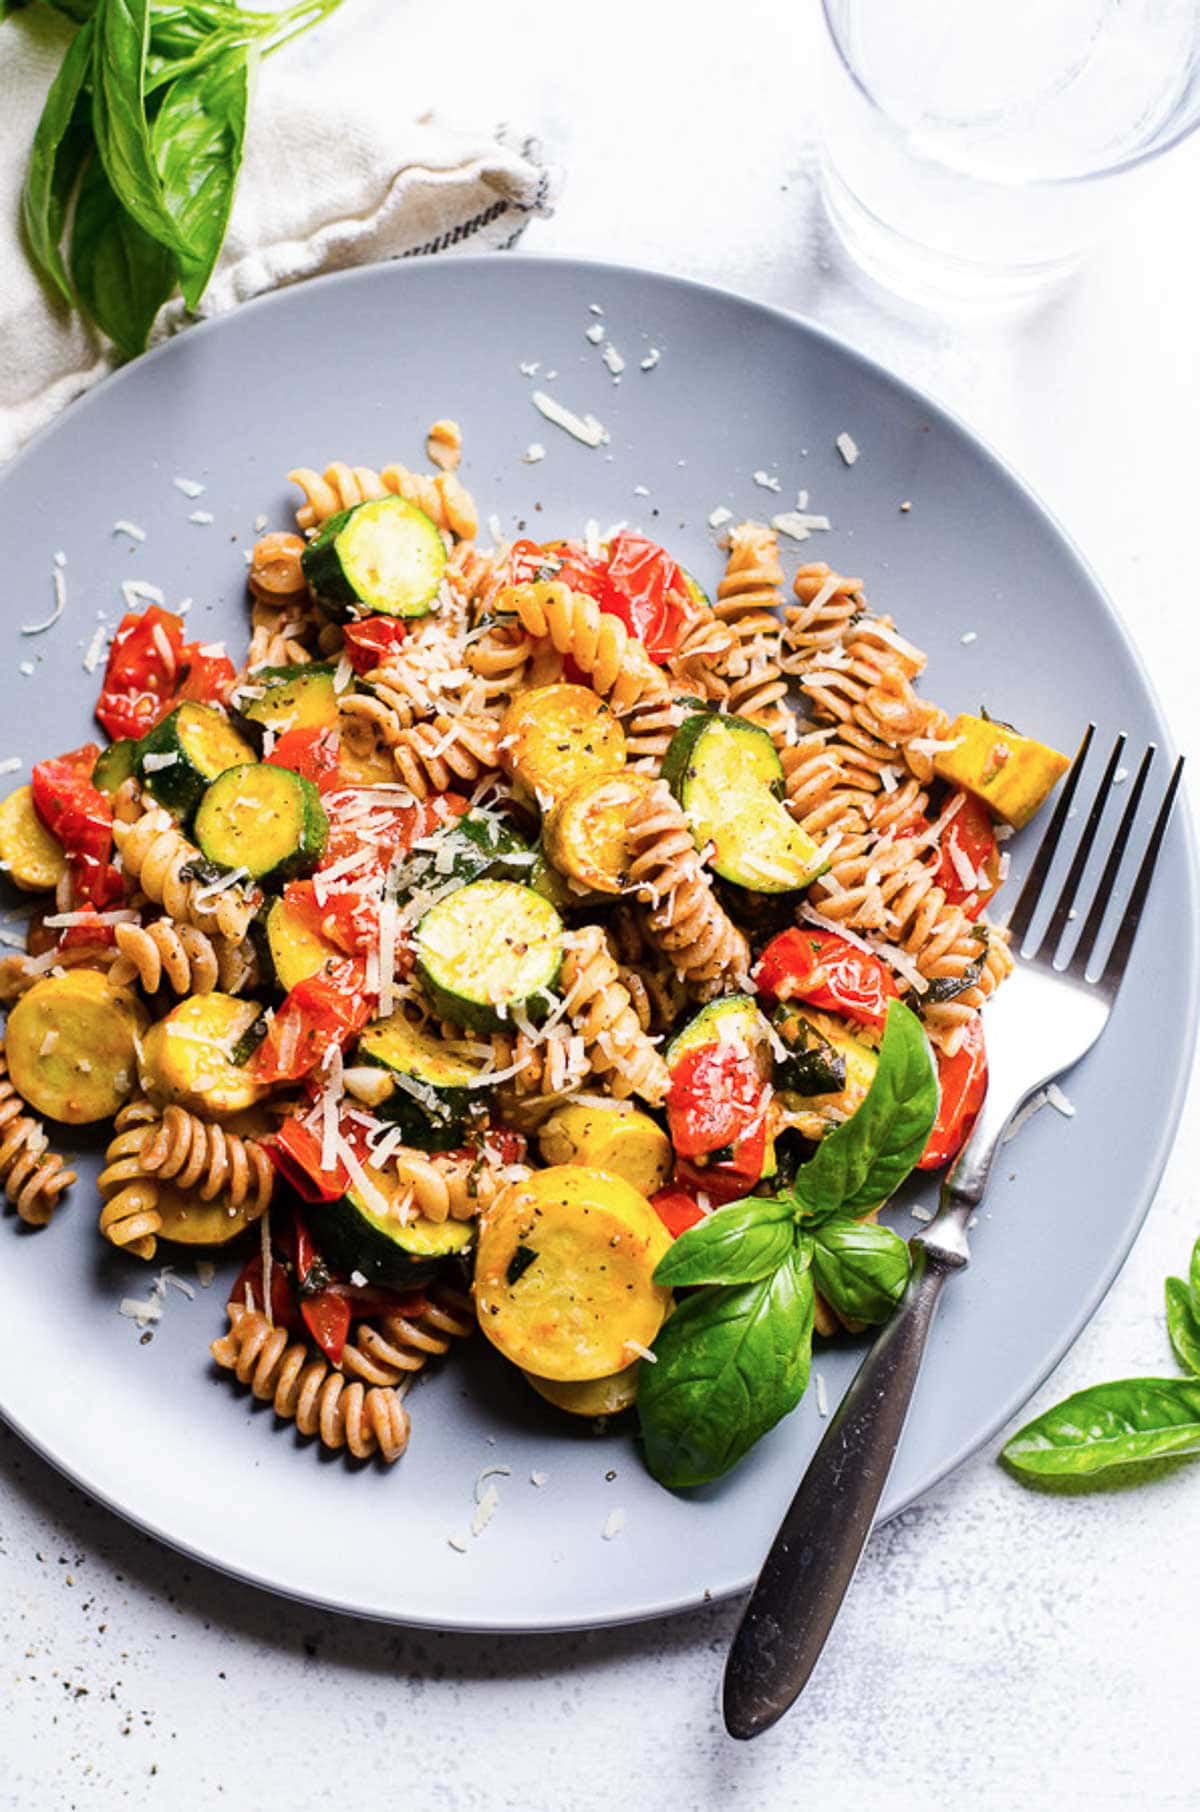 Pasta with zucchini and tomatoes served on a blue plate with a fork.